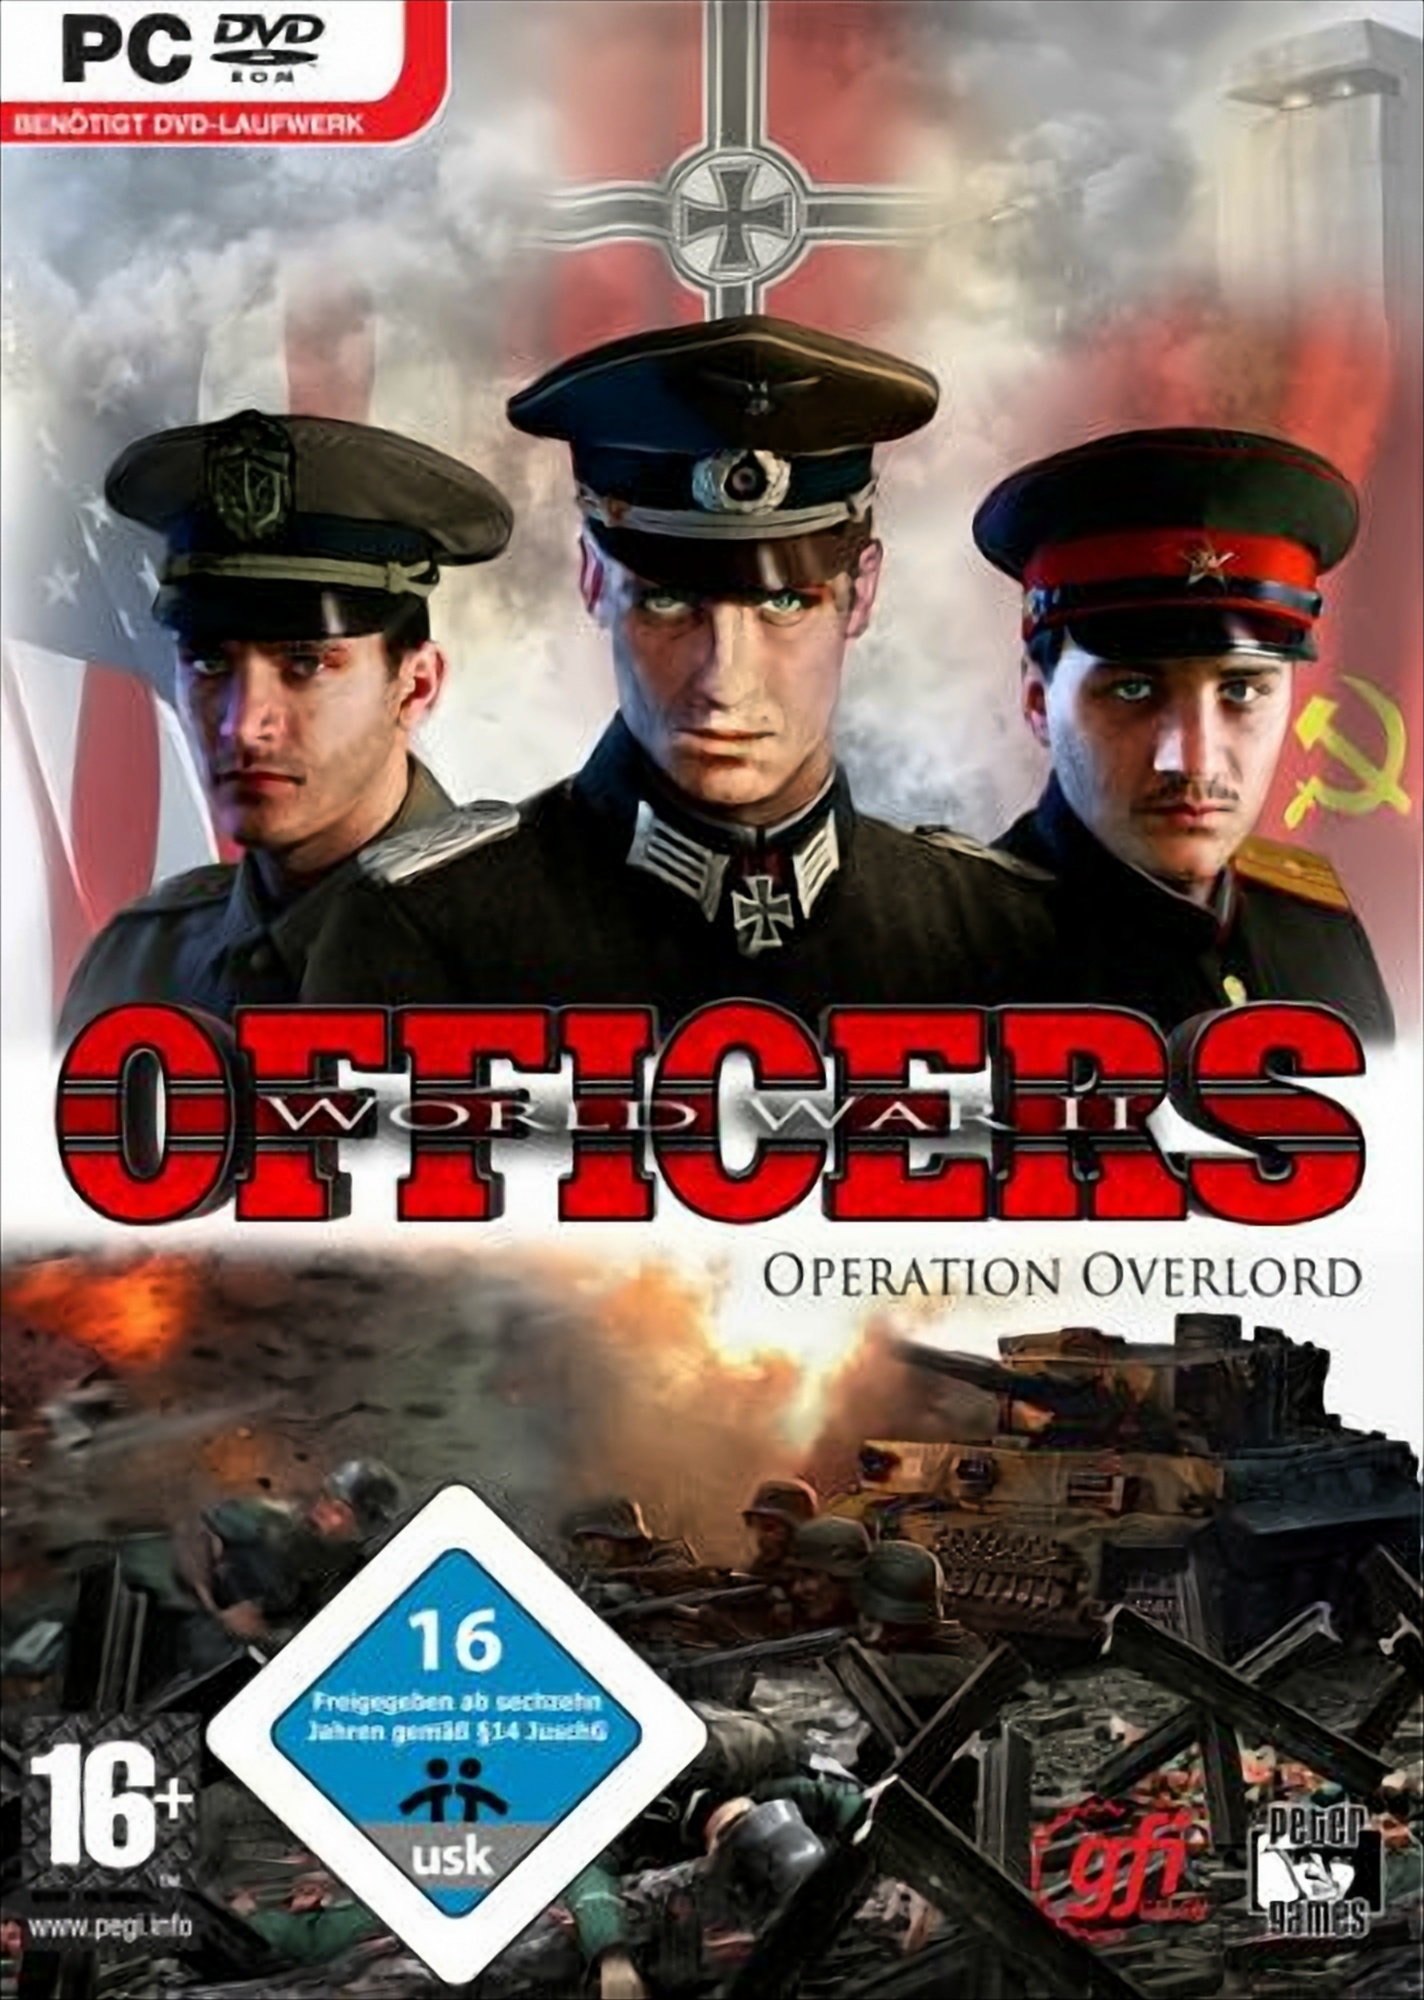 Officers - Operation Overlord [PC] 